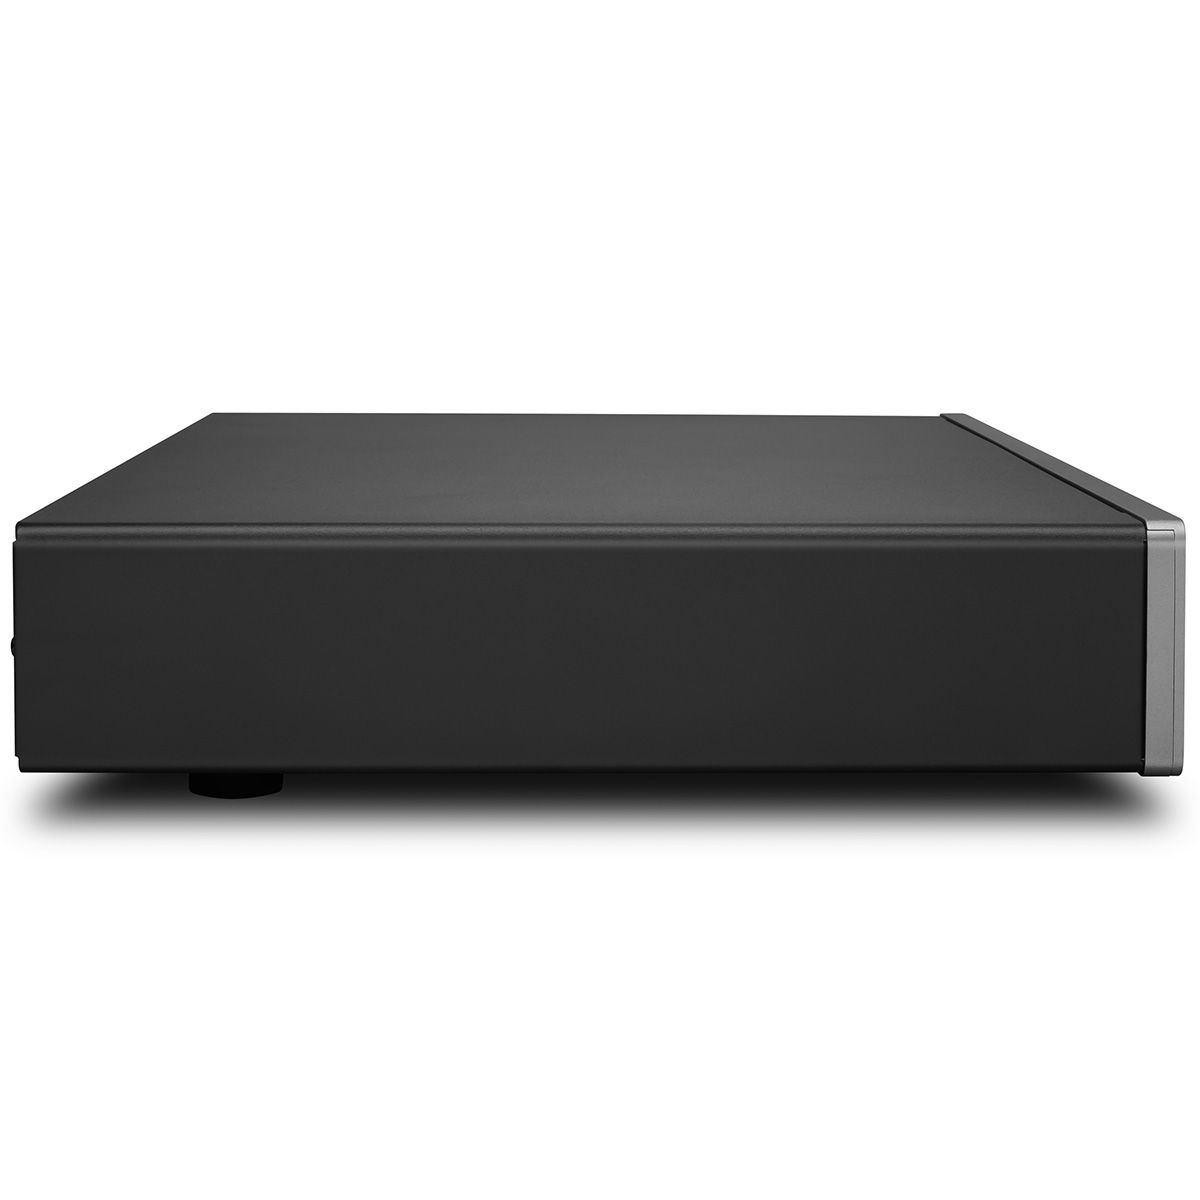 Cambridge CXN100 Network Player - Lunar Grey right side view